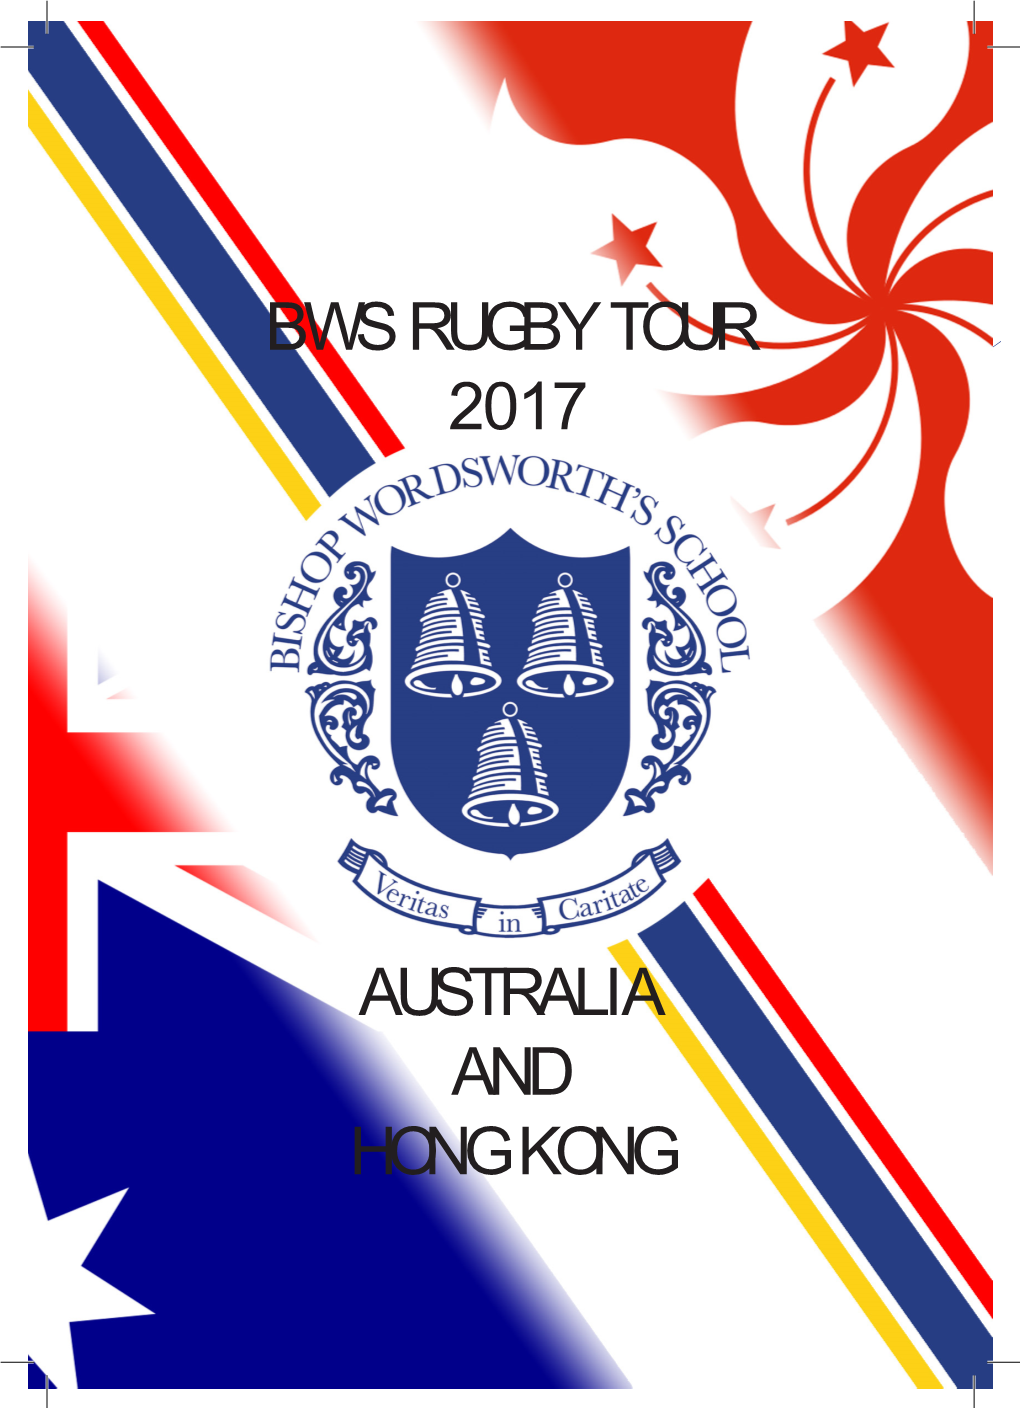 Bws Rugby Tour 2017 Australia and Hong Kong